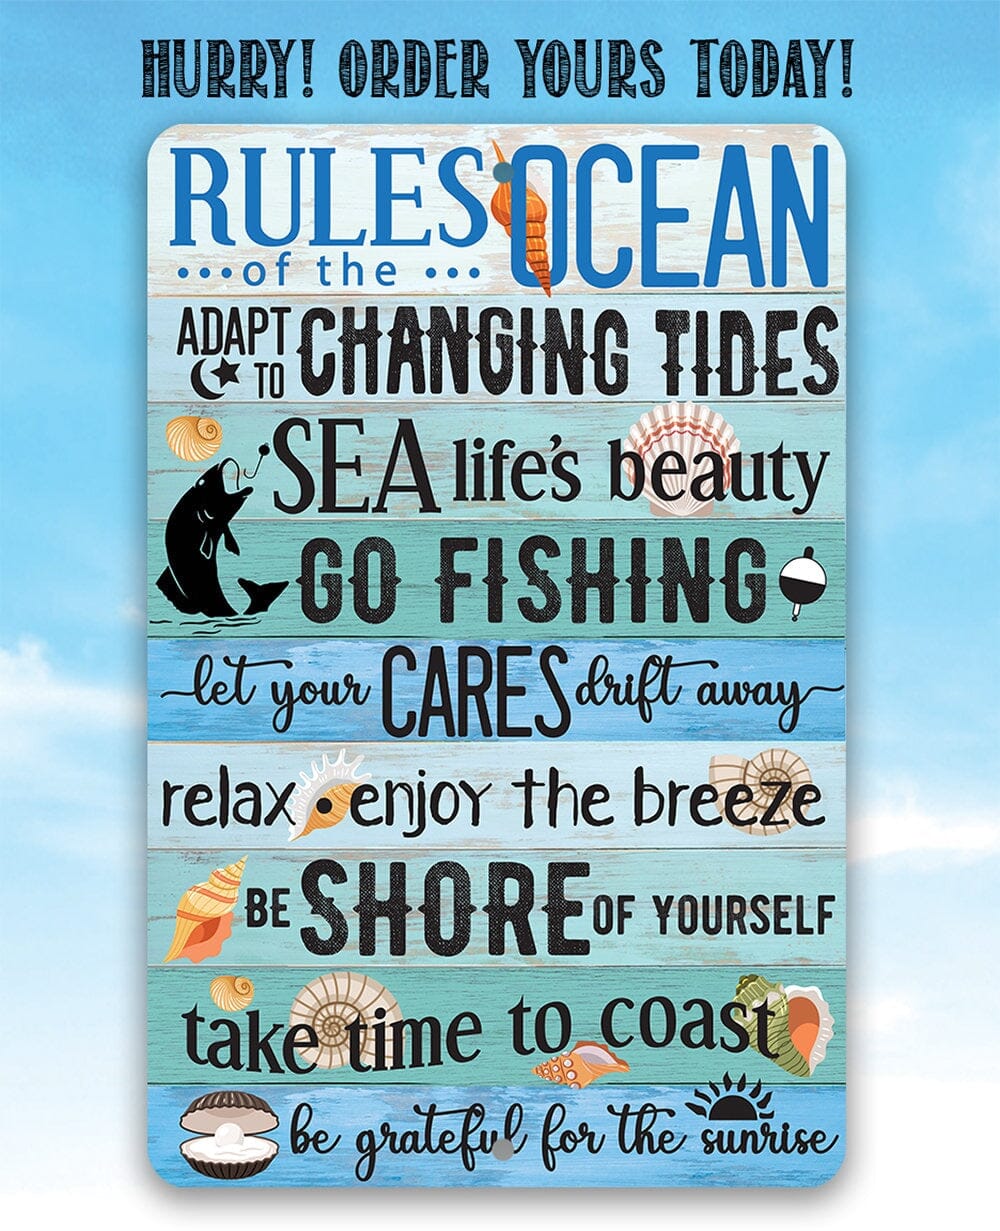 Tin - Rules of the Ocean - Durable Metal Sign - 8" x 12" or 12" x 18" Aluminum Tin Awesome Metal Poster Lone Star Art 